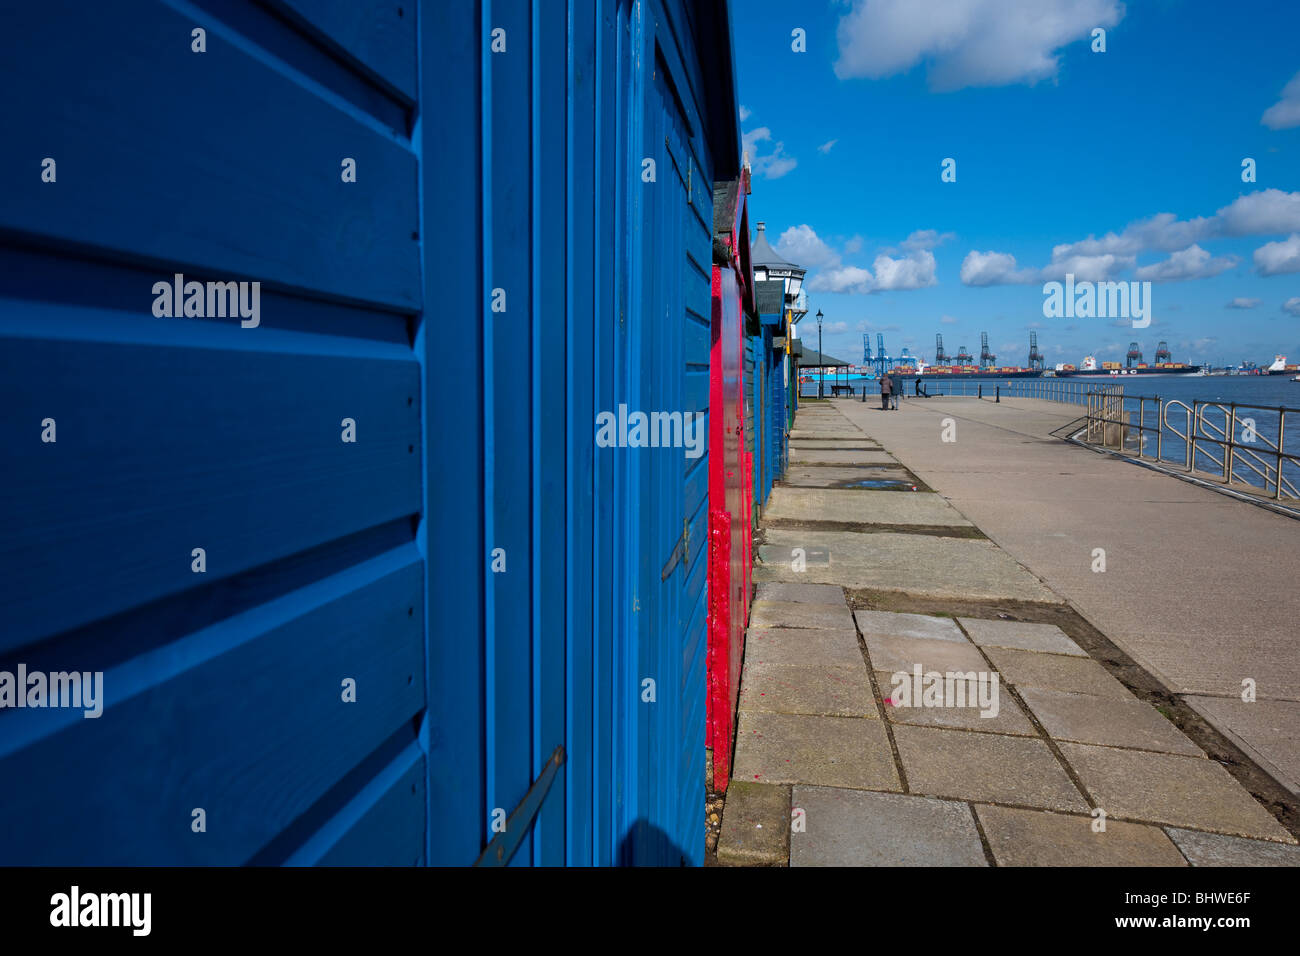 Beach huts along the port of Old Harwich, Essex, UK. Felixstowe docks are on the background. Stock Photo